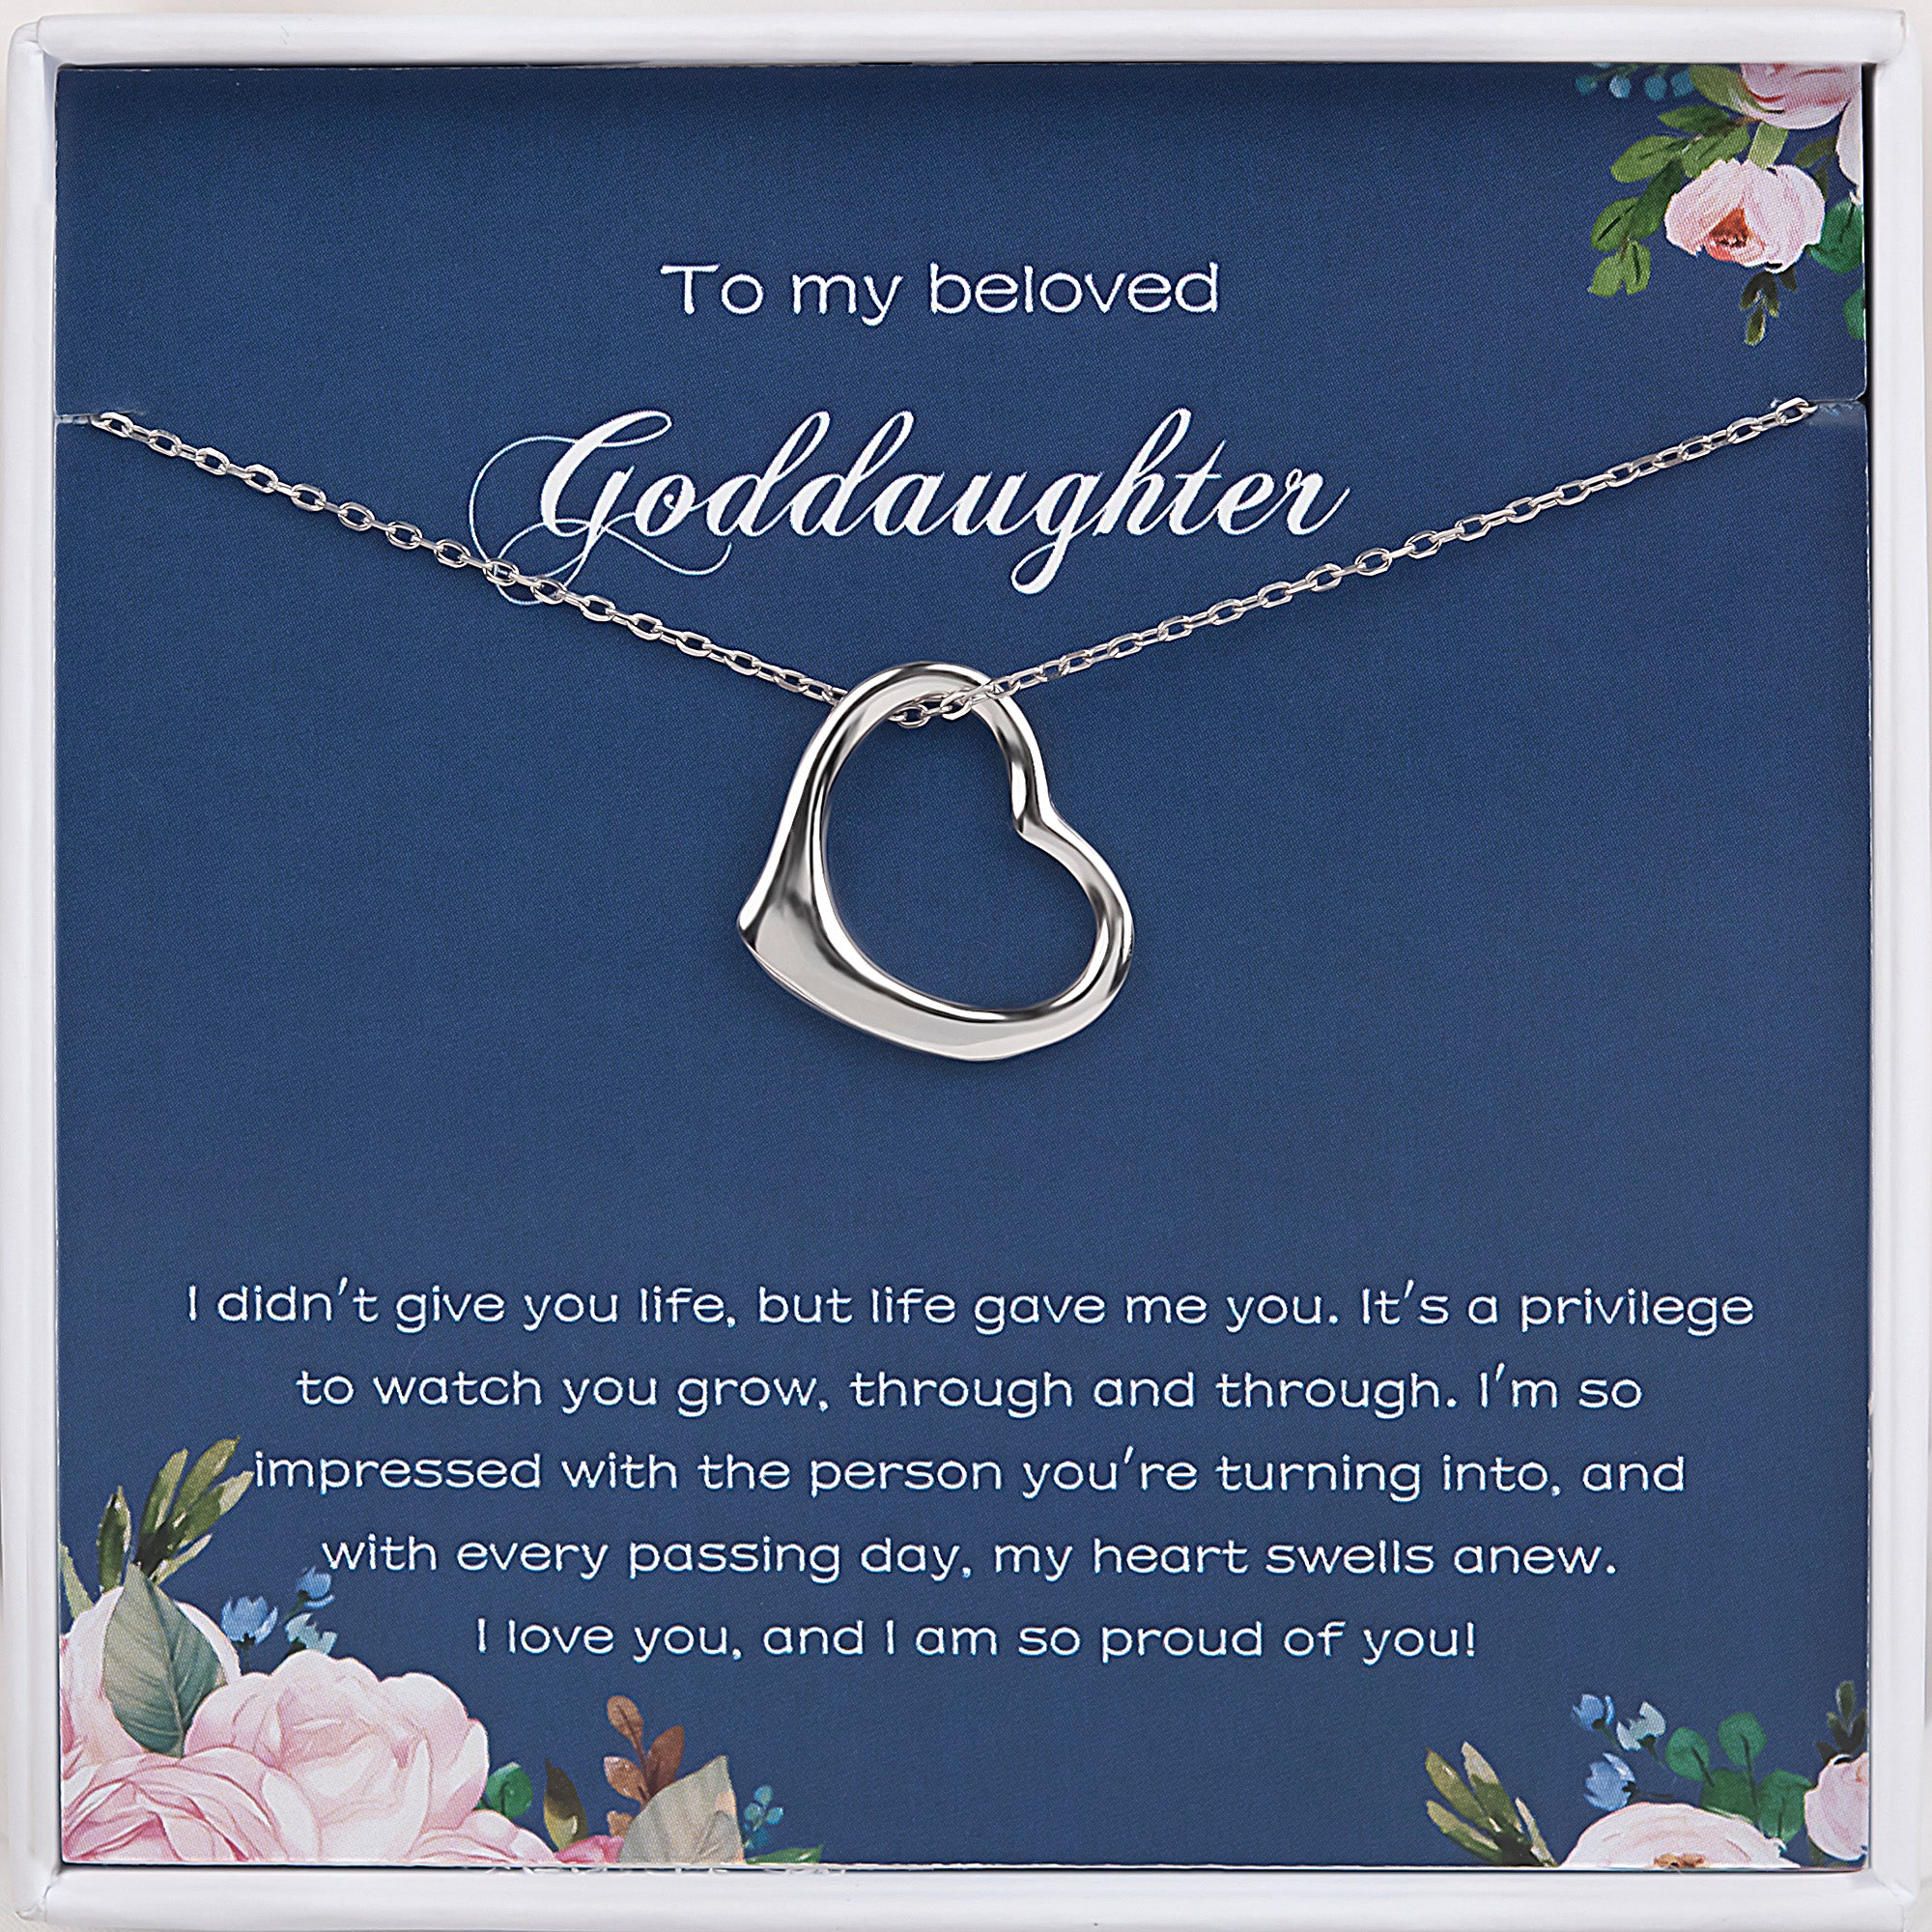 Anavia Mother in Law Gift, Mother of the Groom Gift, Jewelry and Card Gift  for Mother in Law, Mother's Day Gift, Necklace and Card Gift [Gold Infinity